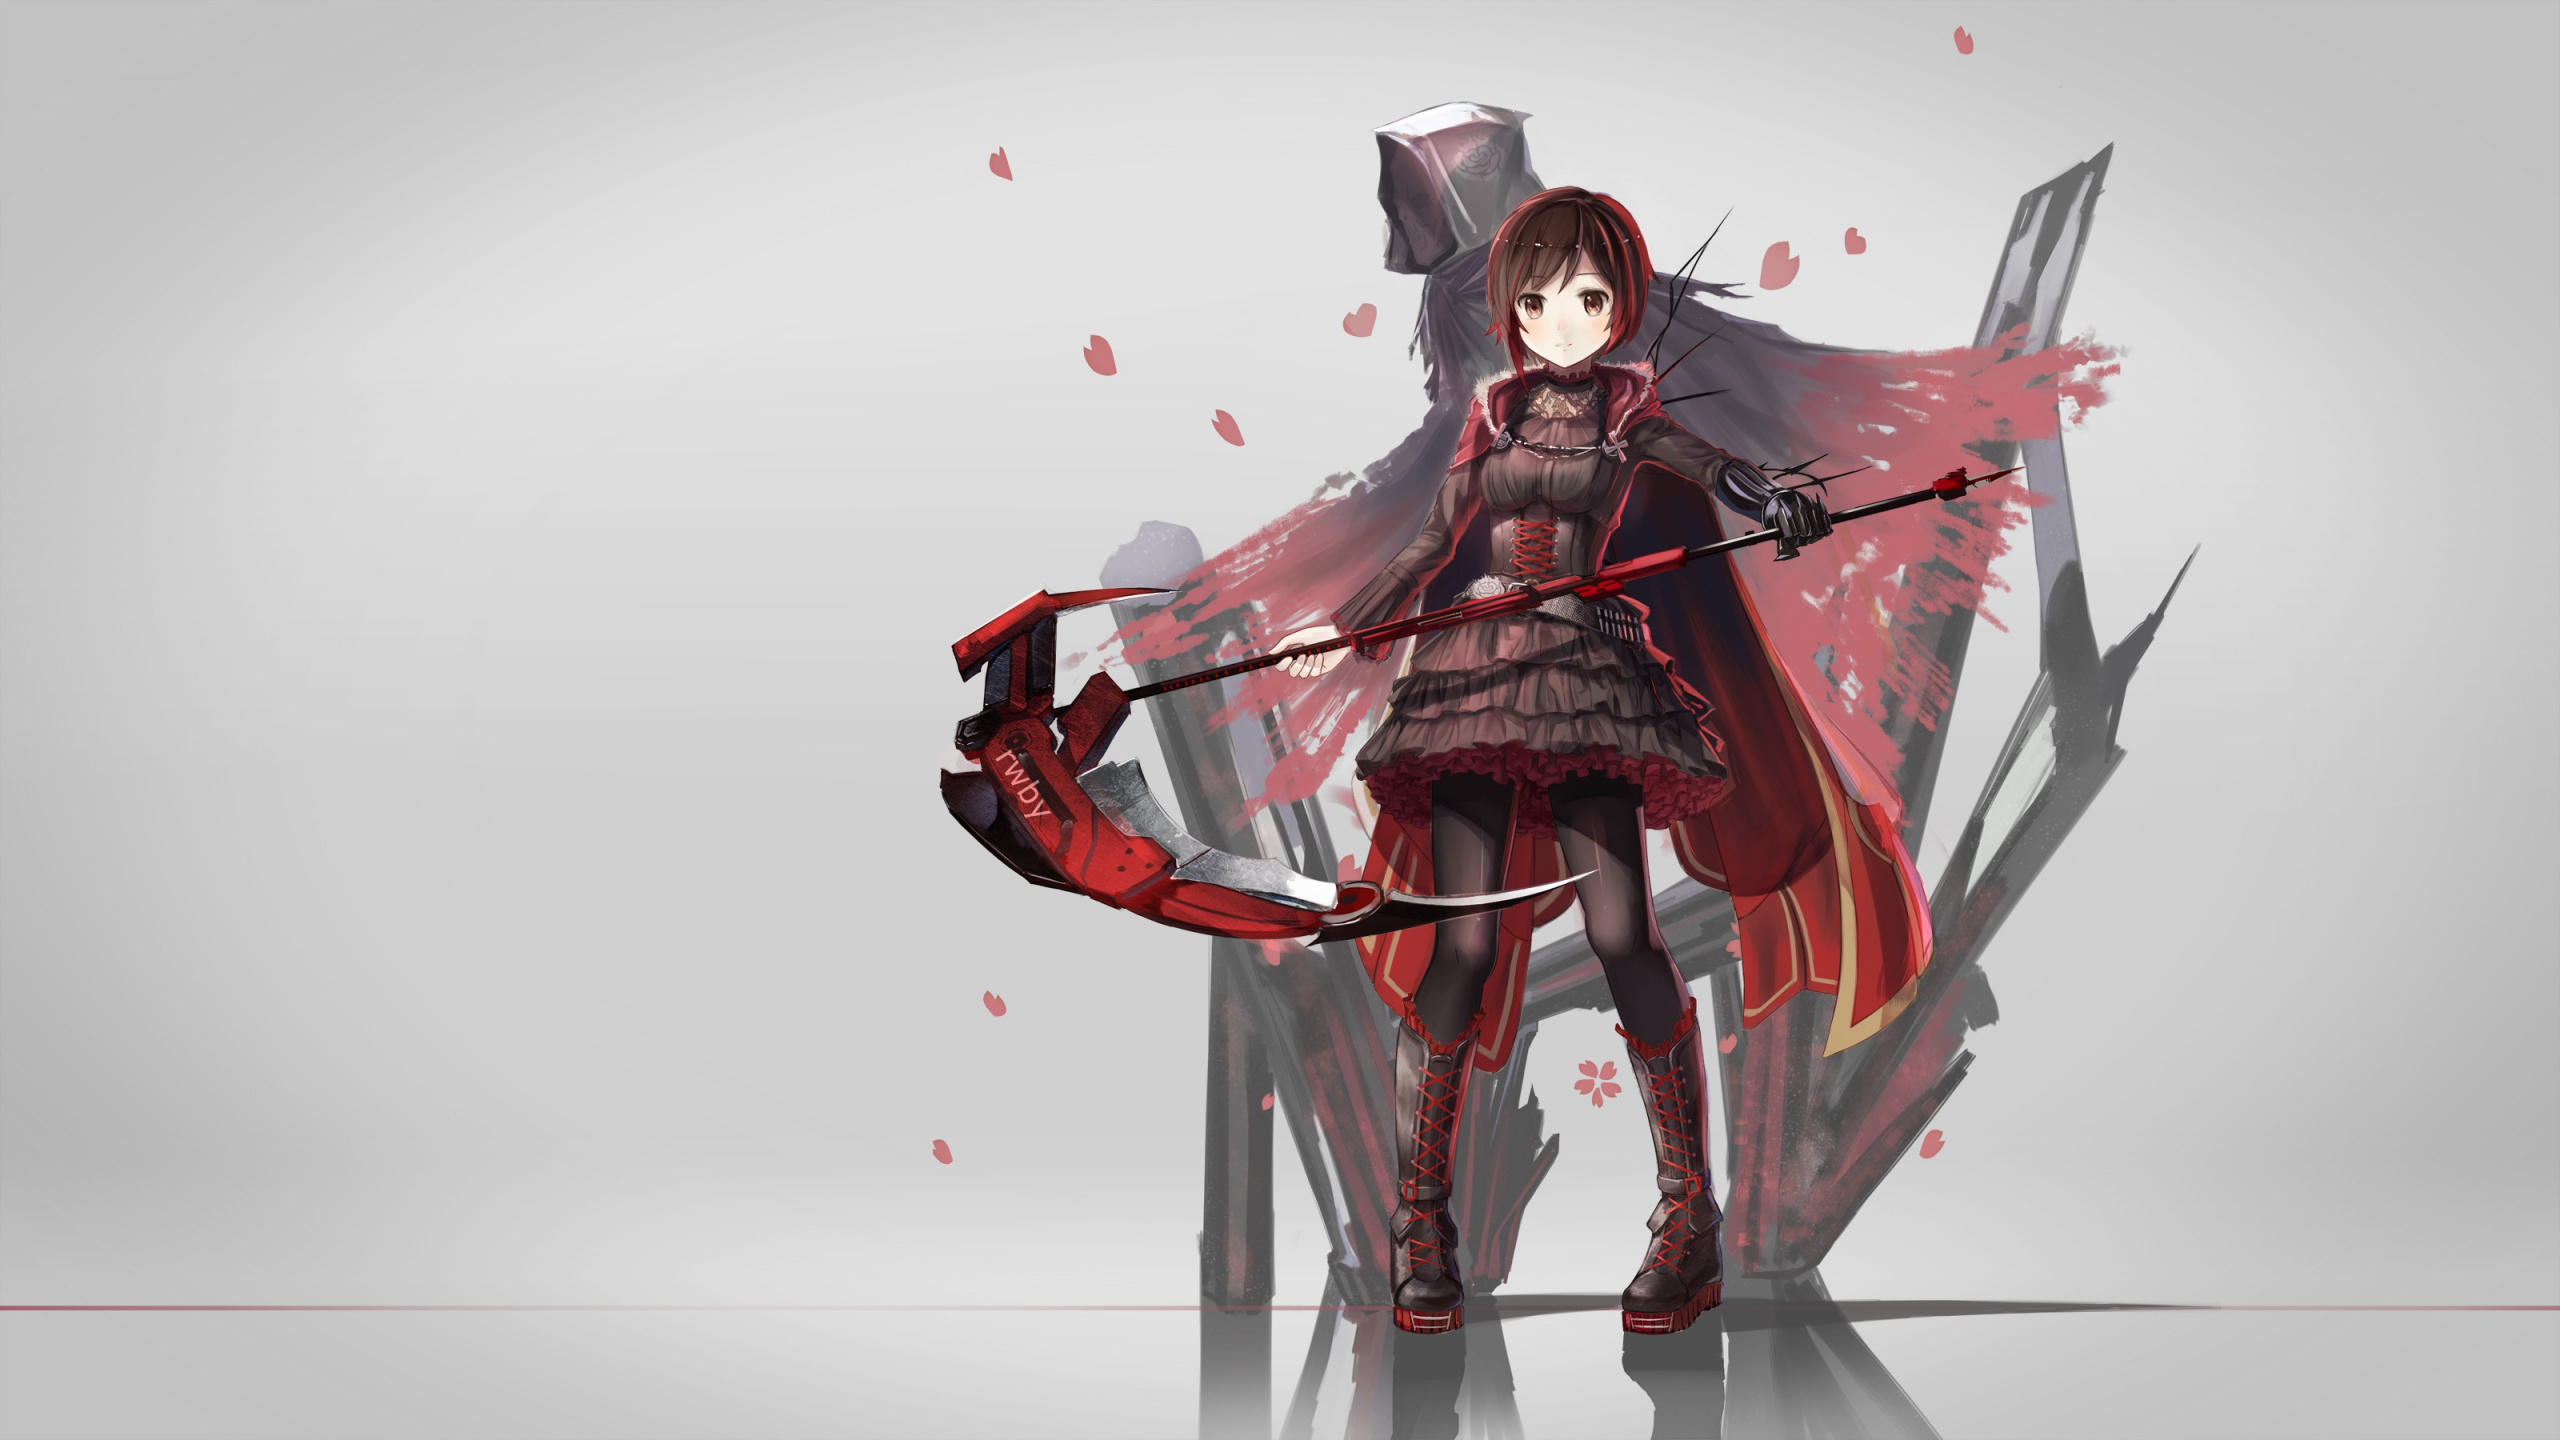 Woman in Red and Black Dress Anime Character. Wallpaper in 2560x1440 Resolution